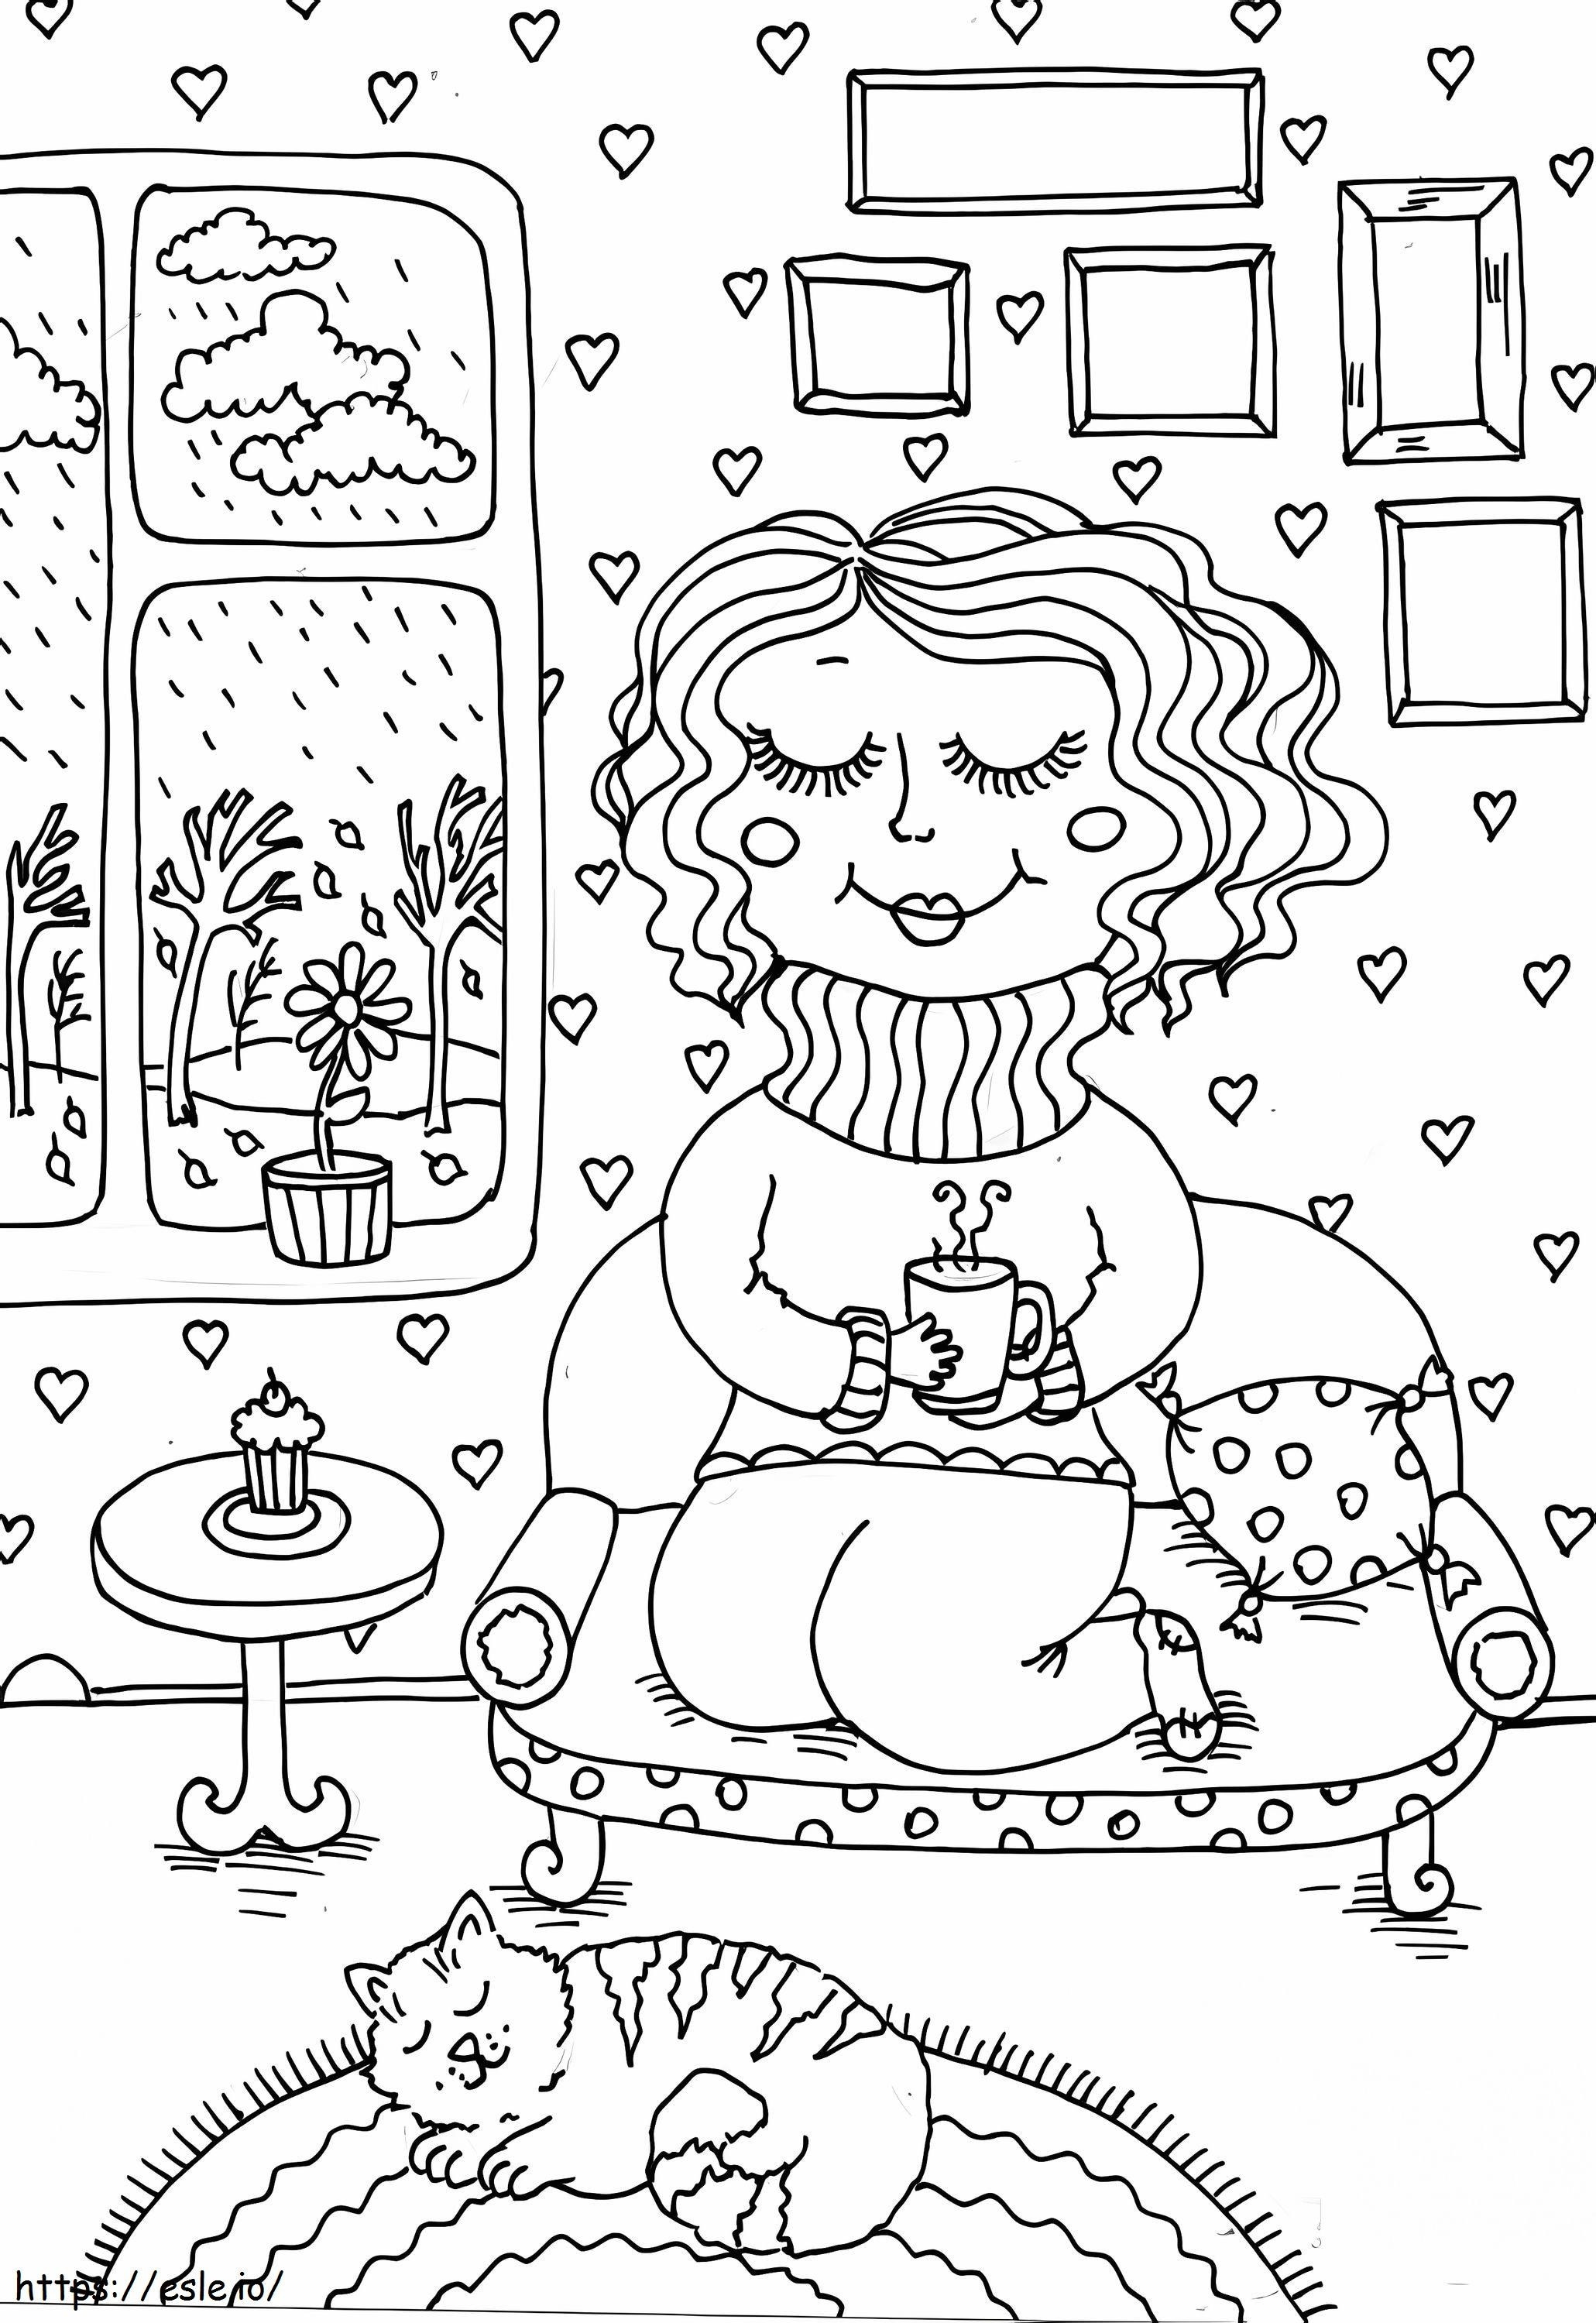 Peppy In November coloring page